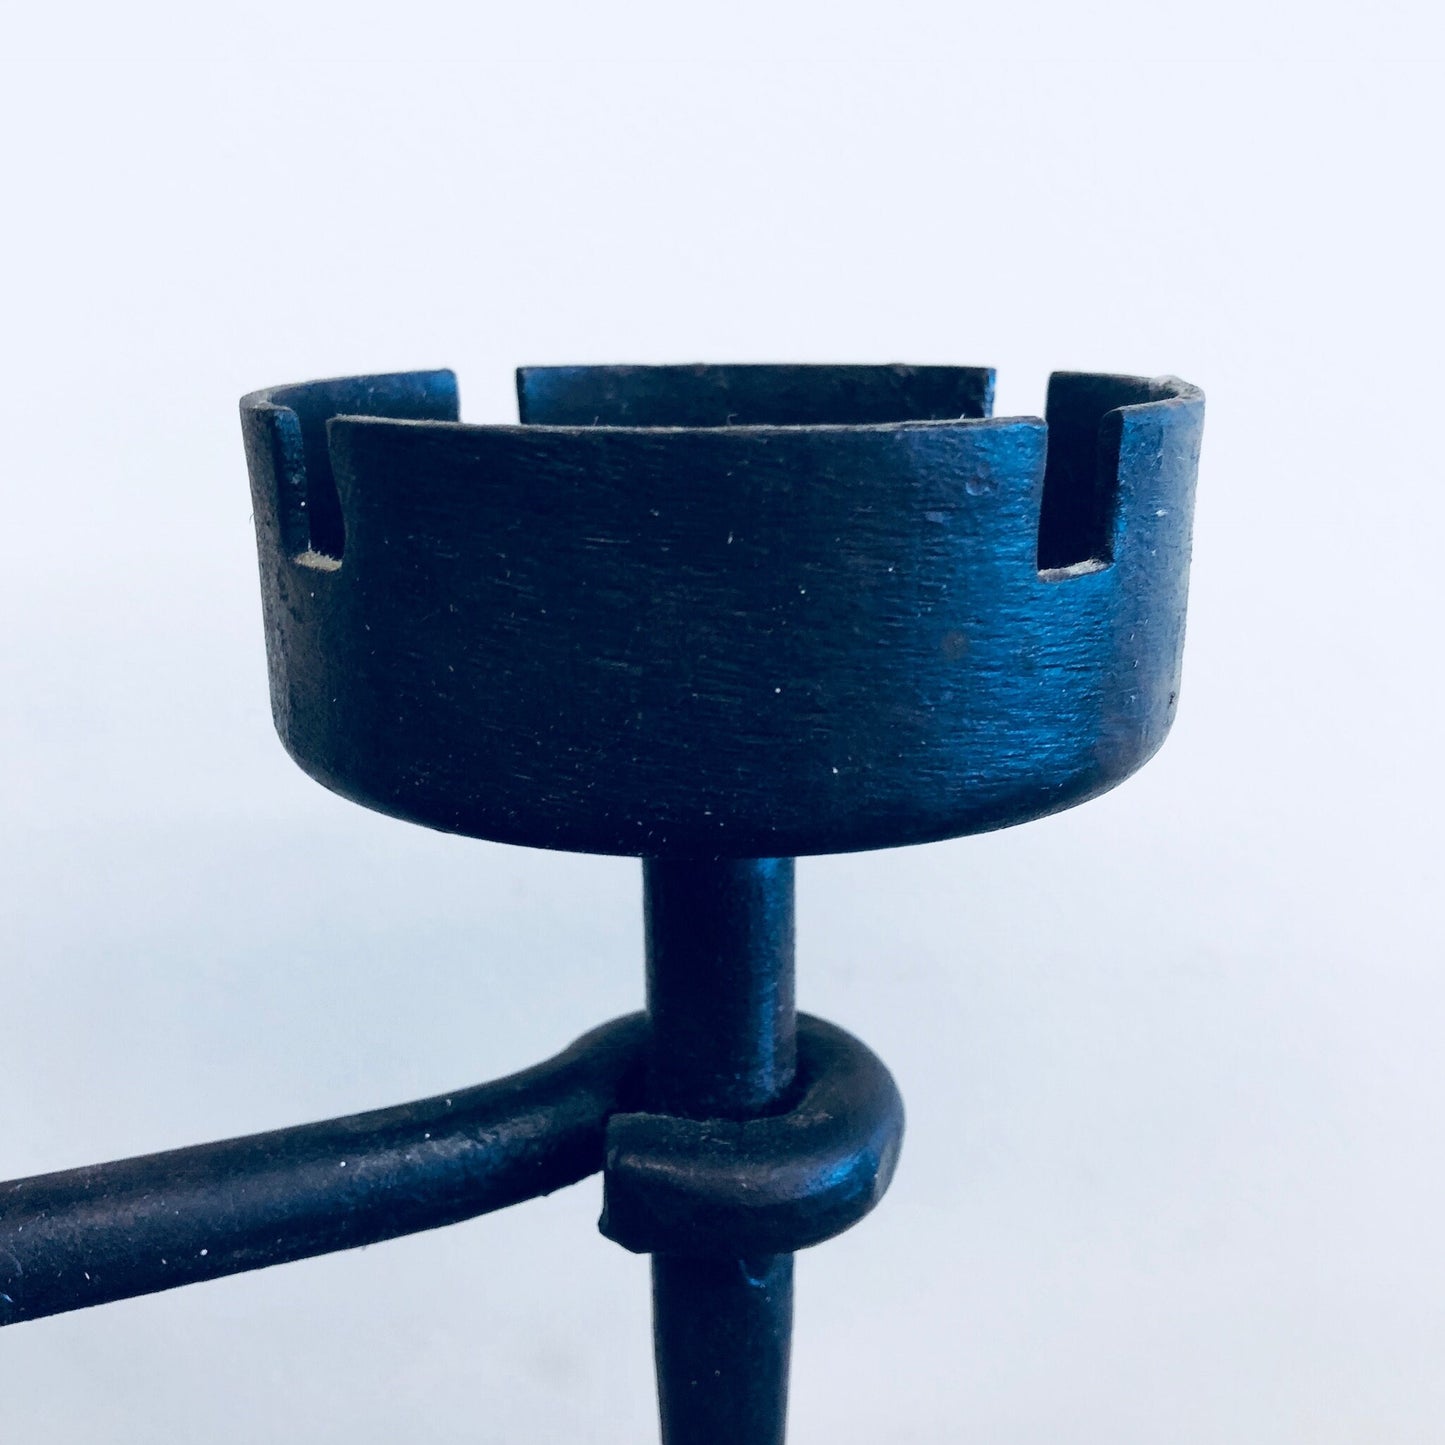 Wrought iron candle holder with a blue patina finish, featuring a round open top for holding a candle or serving as an ashtray, mounted on an intricate curved base, suitable as vintage or rustic home decor centerpiece or mantle decoration.